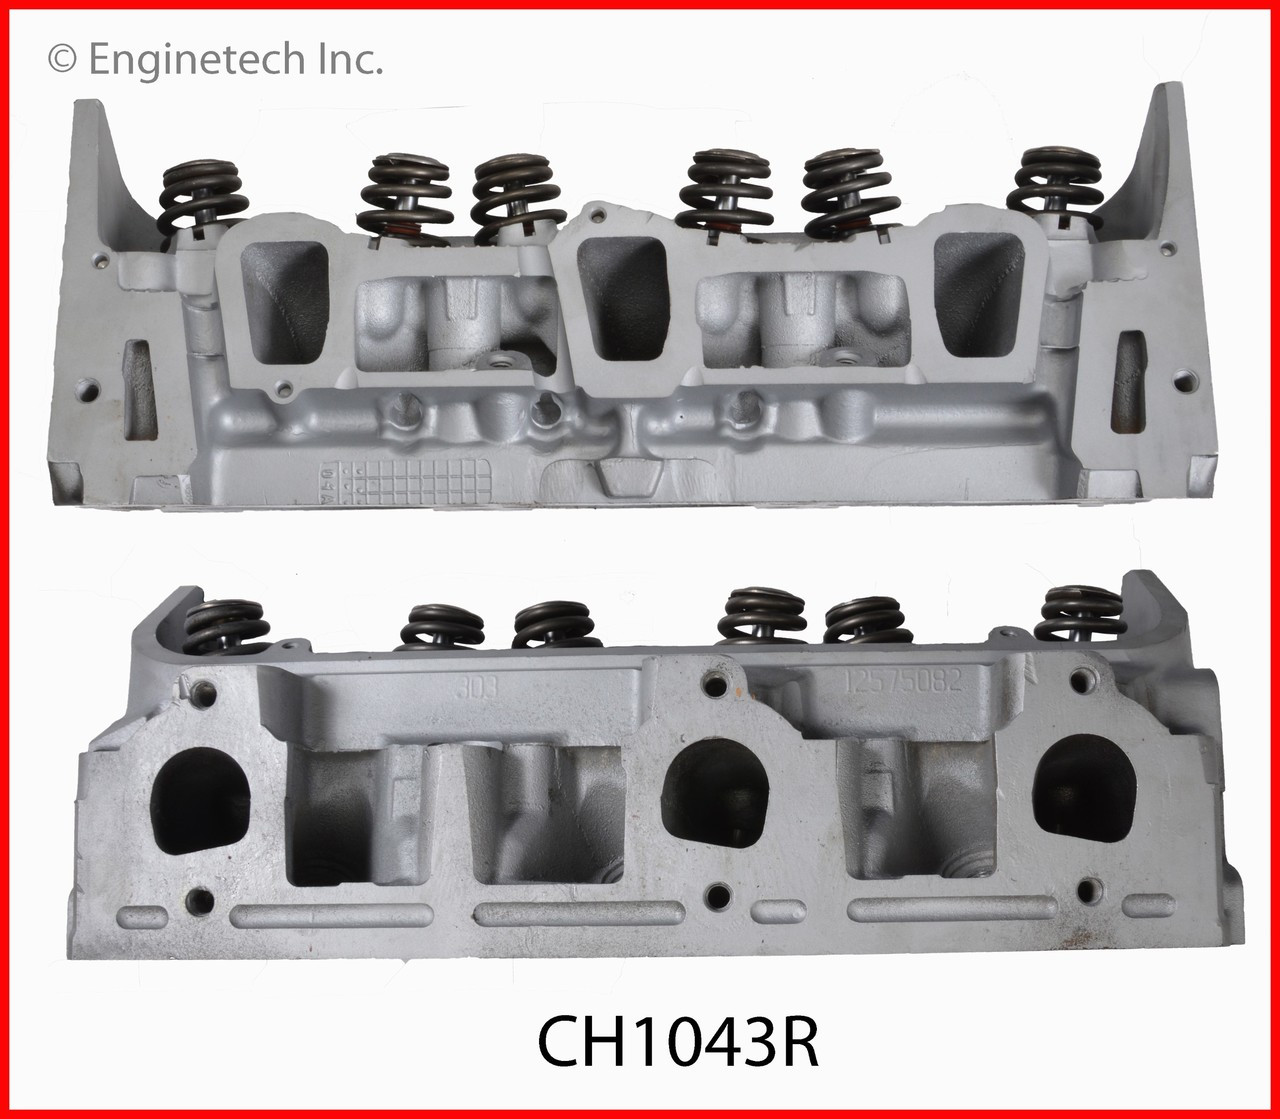 2007 Chevrolet Equinox 3.4L Engine Cylinder Head Assembly CH1043R -8